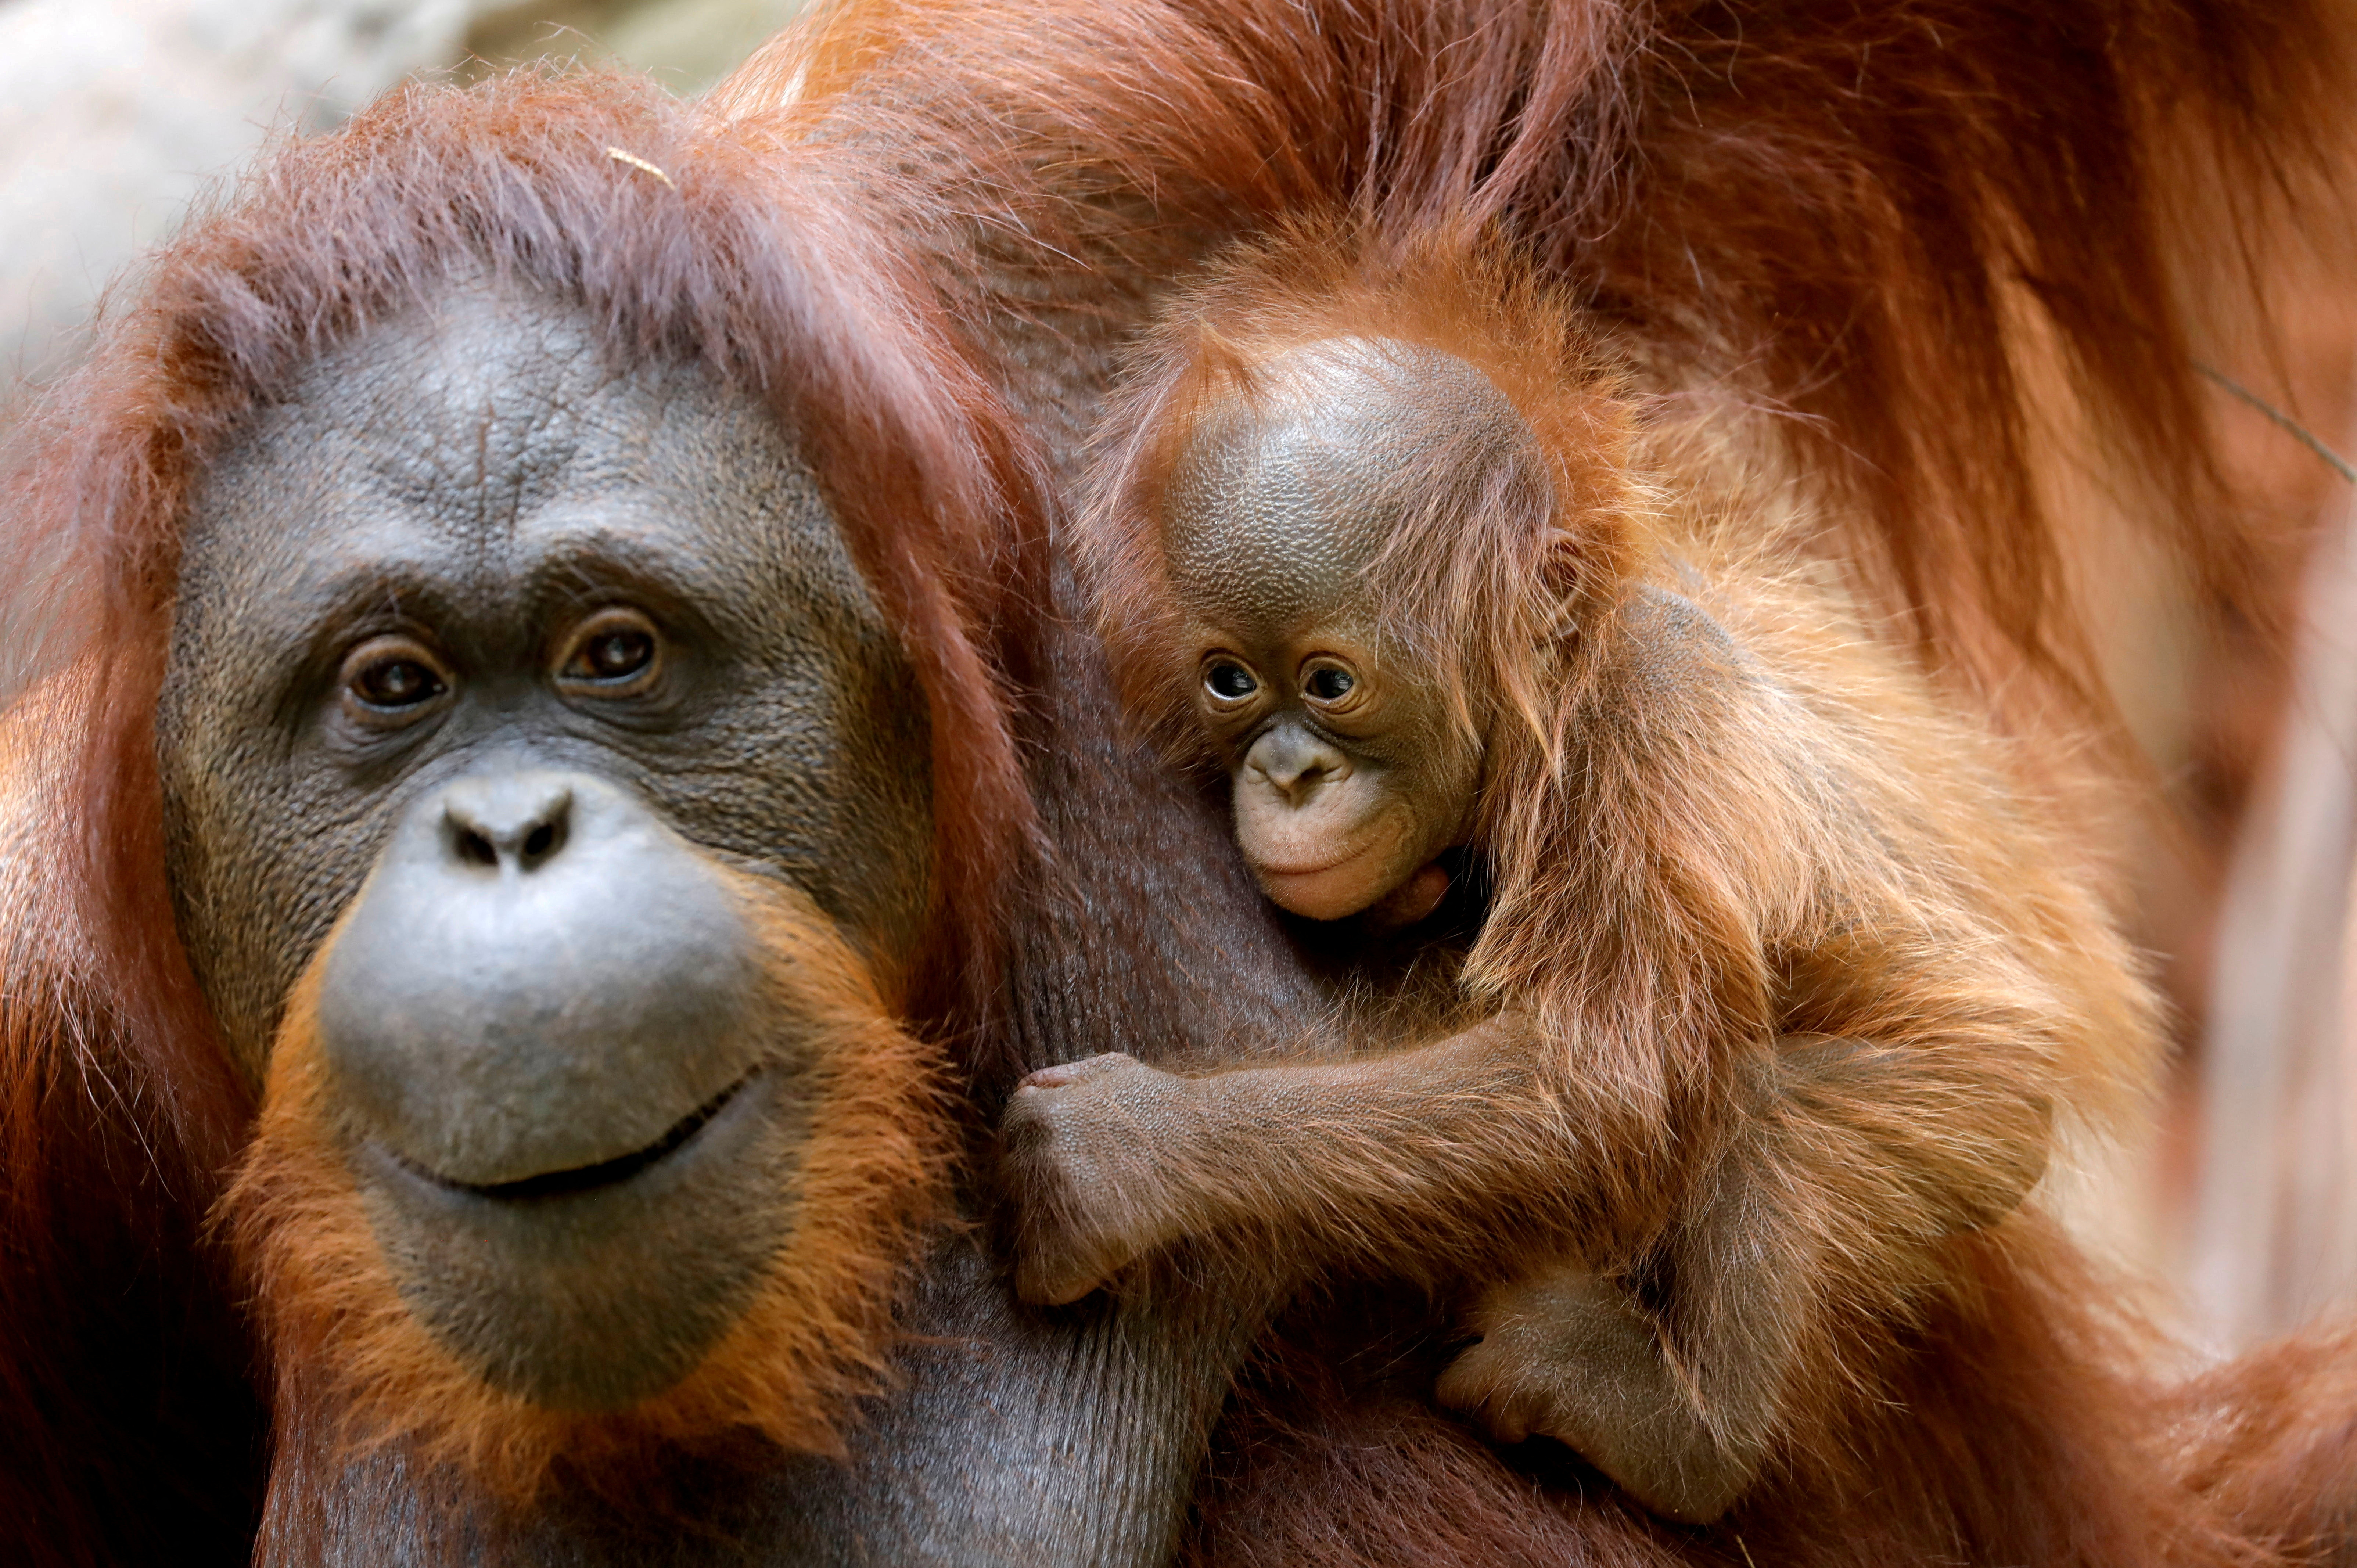 An eleven-day-old baby male Bornean orangutan is held by his mother Suli at Bioparc Fuengirola in Fuengirola